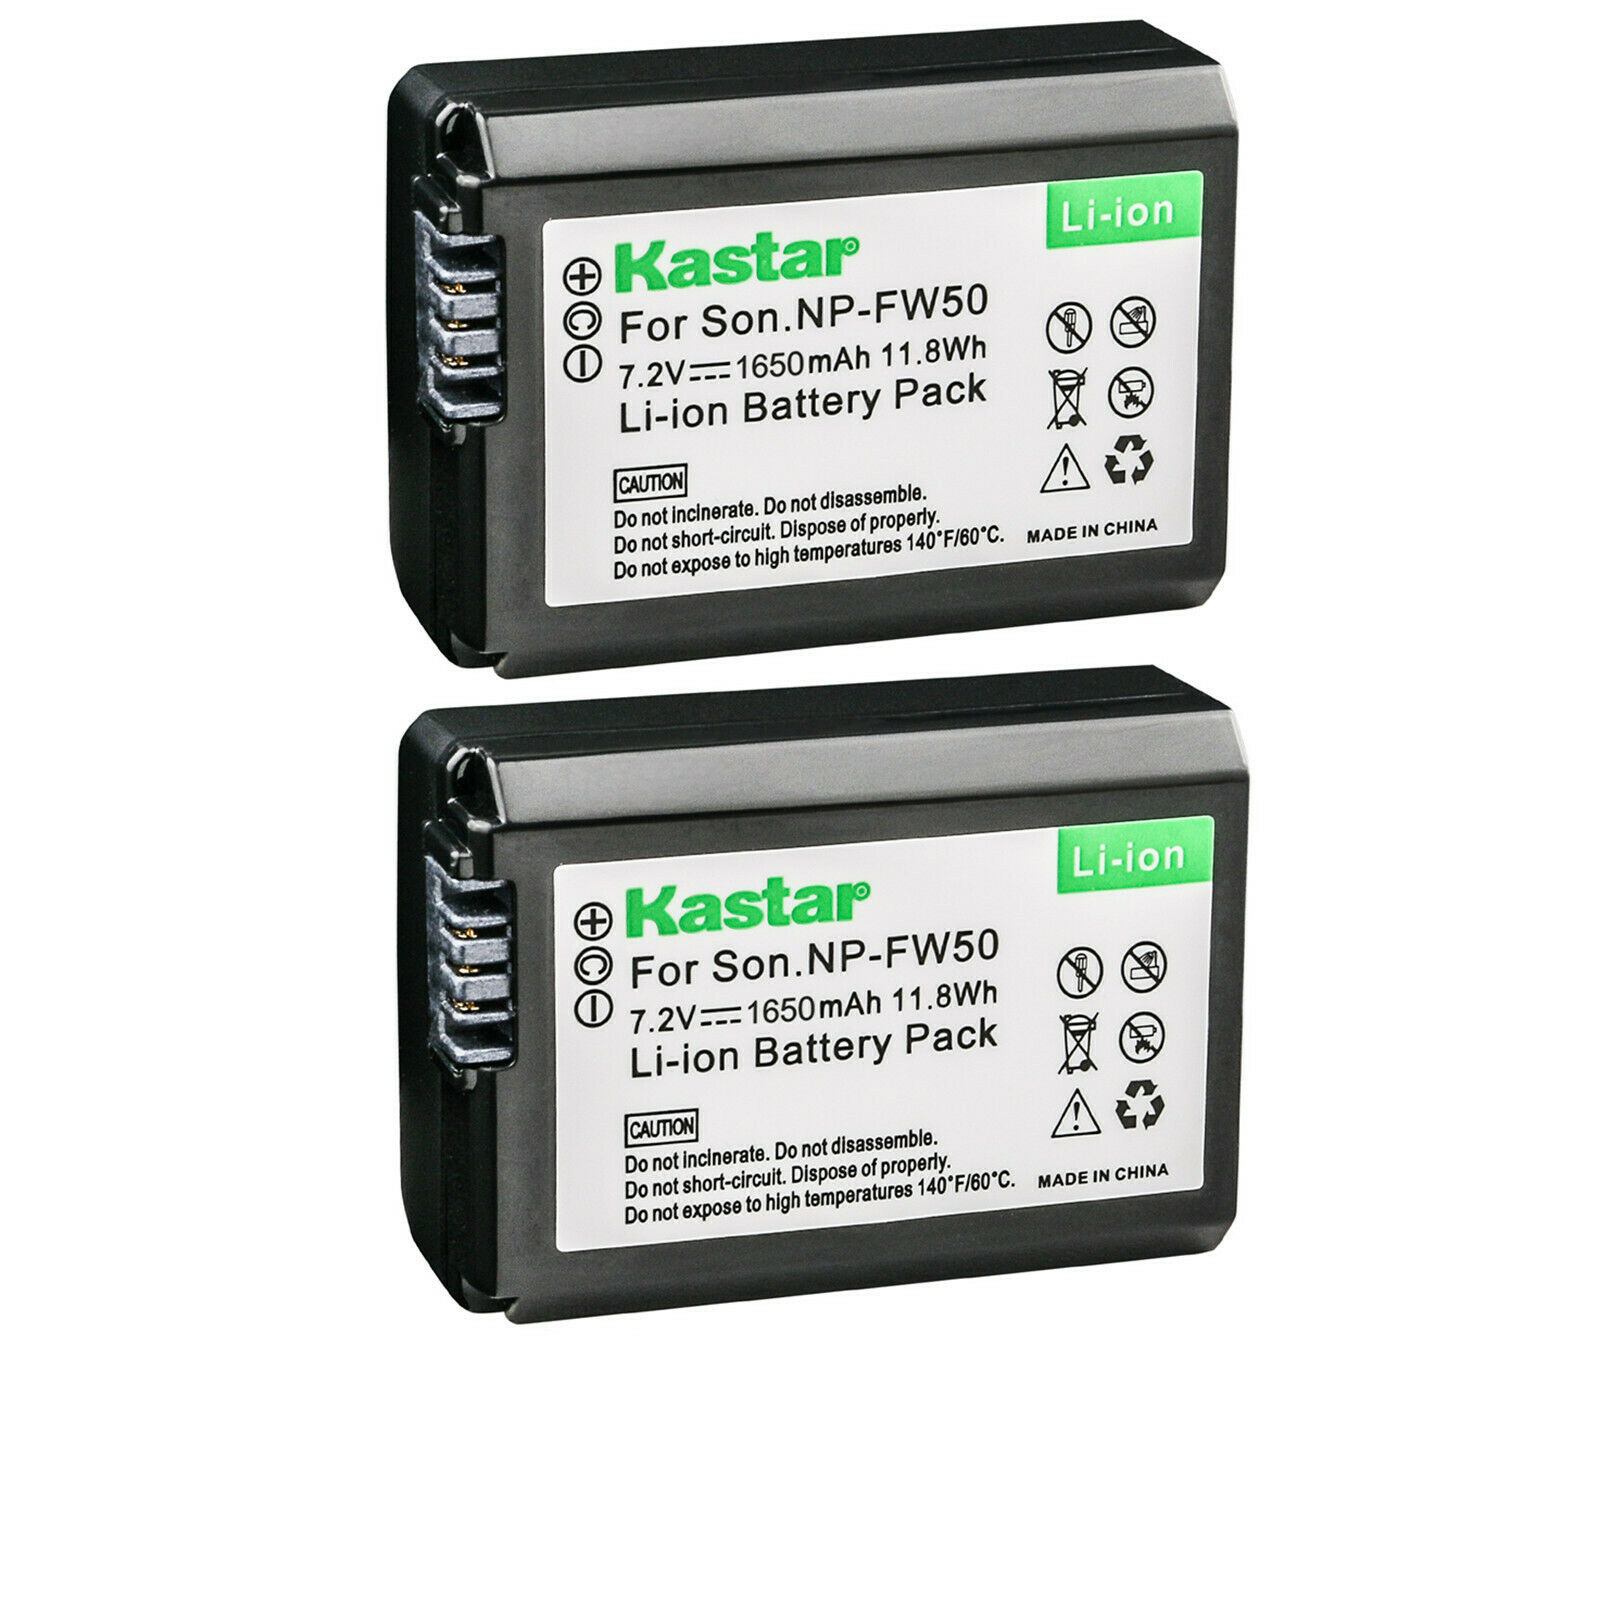 Kastar 2-Pack NP-FW50 Battery Replacement for Sony a6000, ILCE-6100, alpha α6100, ILCE-6300, α6300, a6300, ILCE-6400, α6400, a6400, ILCE-6500,, a6500, ILCE-7 Camera - image 1 of 3